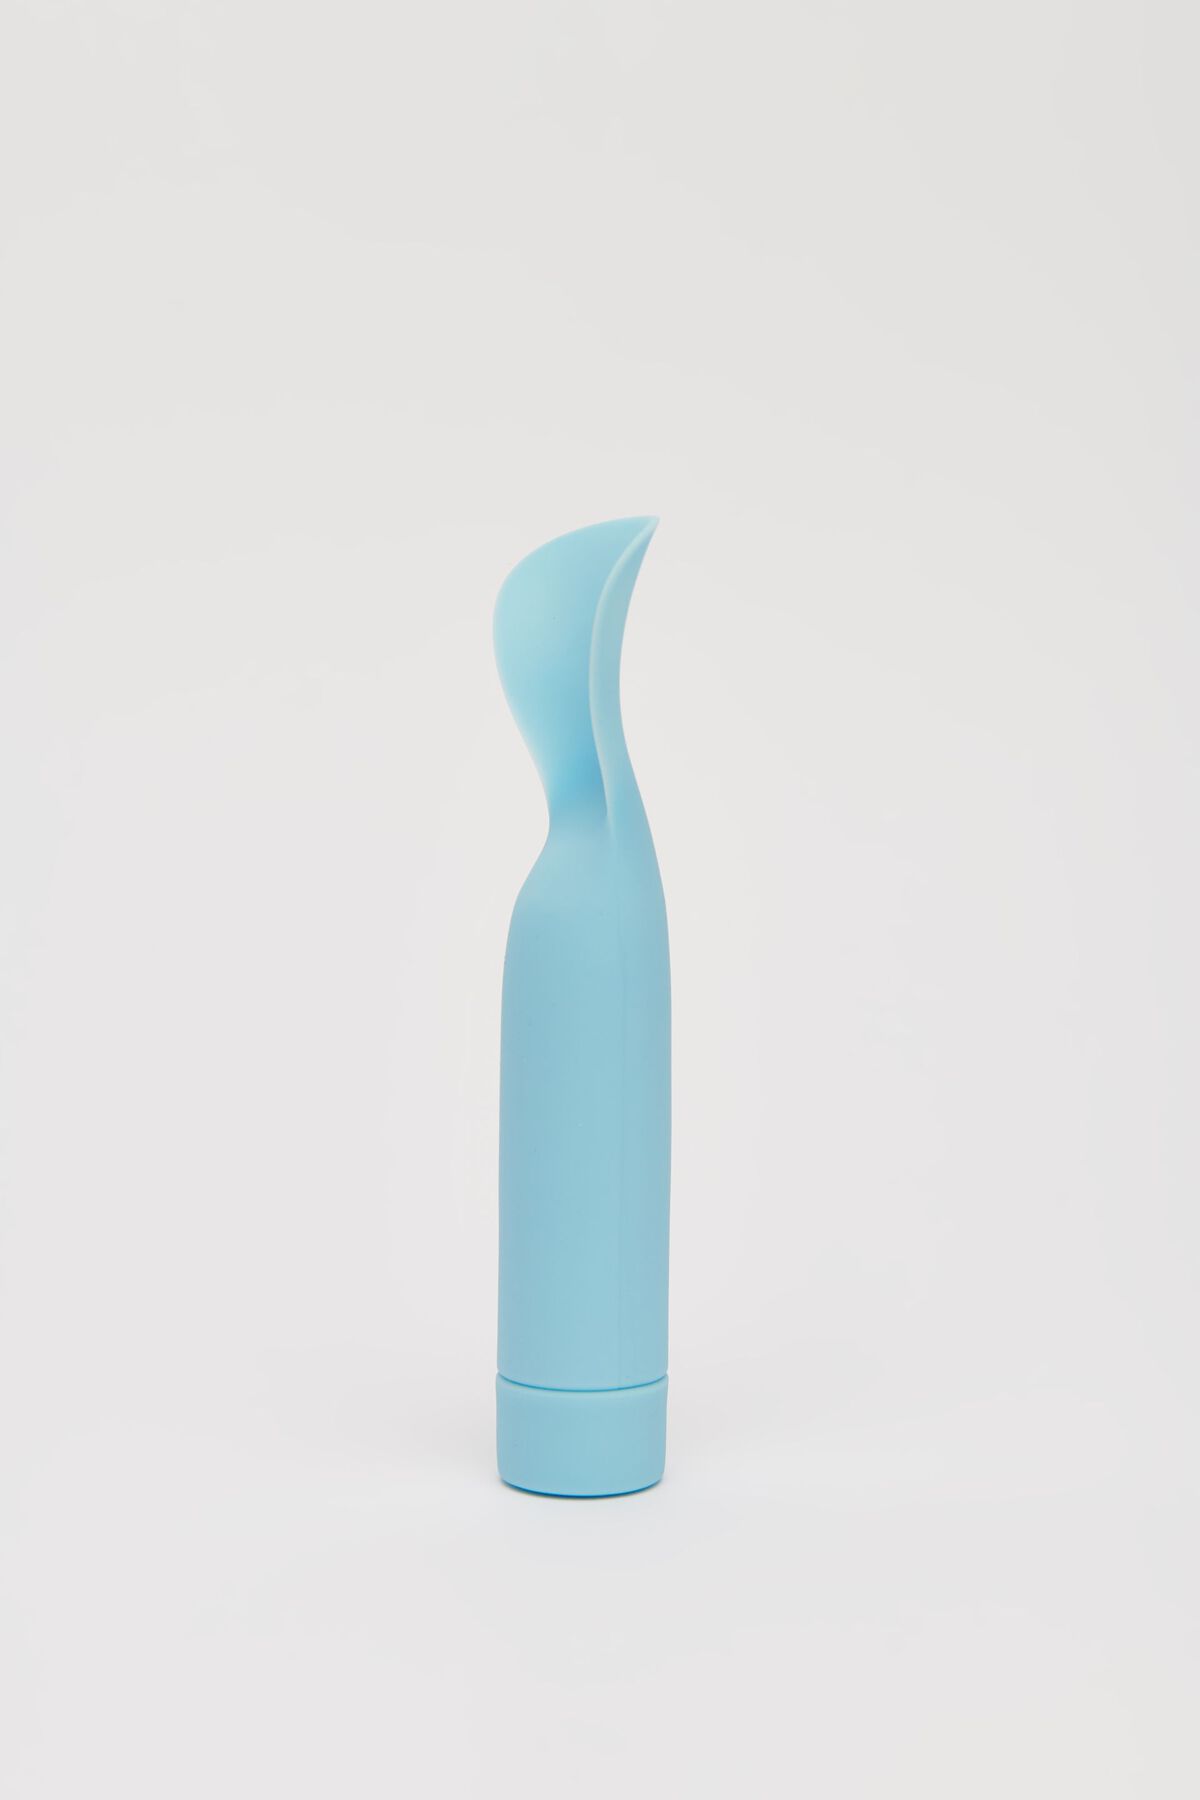 Garage SMILE MAKERS | The French Lover Vibrator. 2